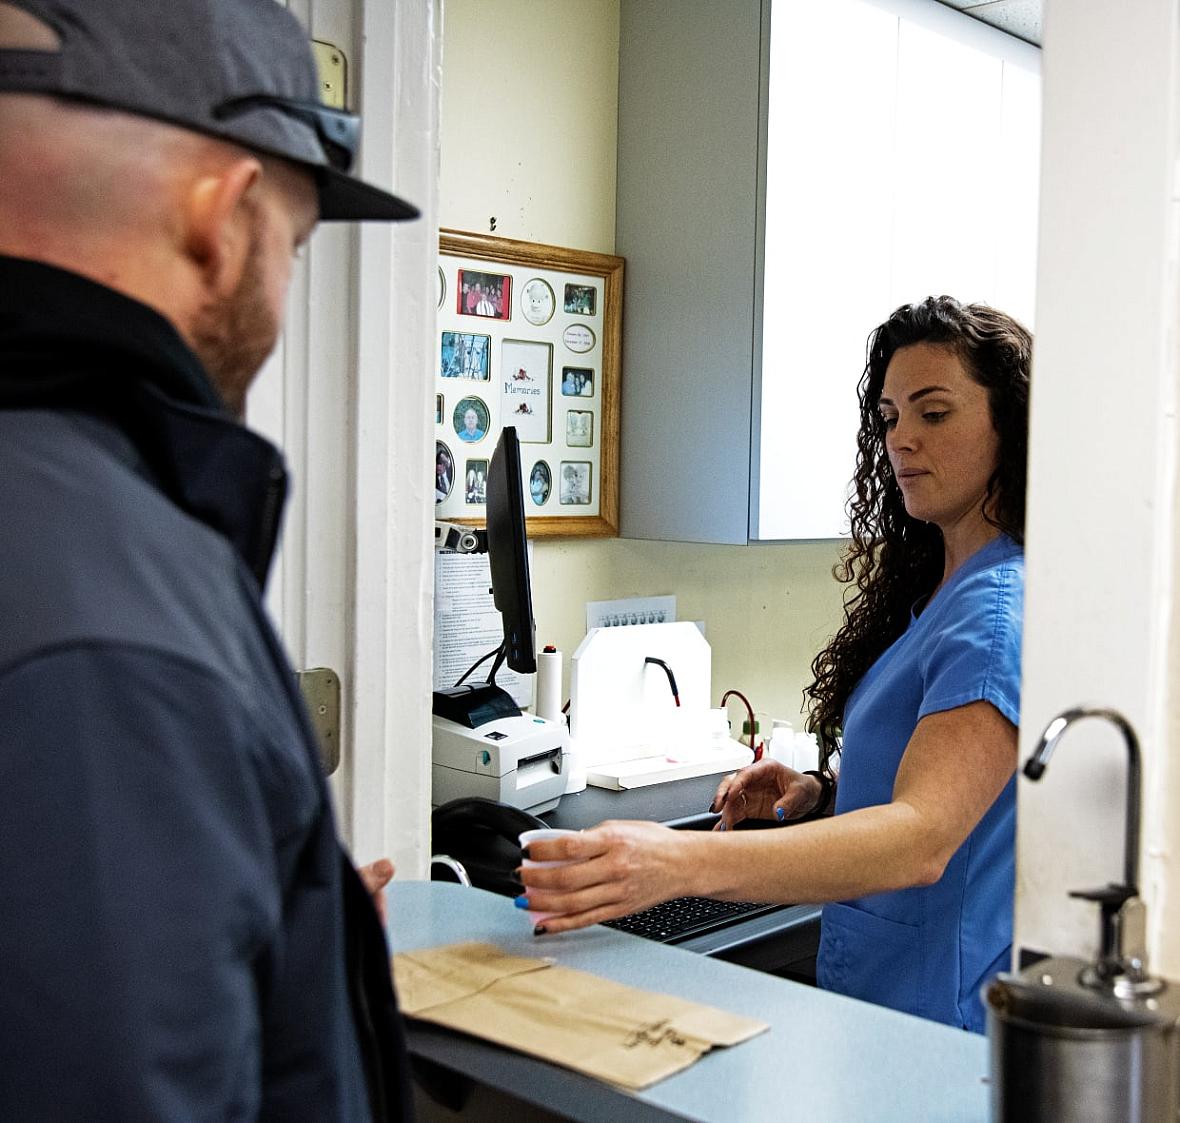 A client receives his dose of methadone from a dispensing nurse at C.O.R.E. Medical Clinic in Sacramento, California, on March.